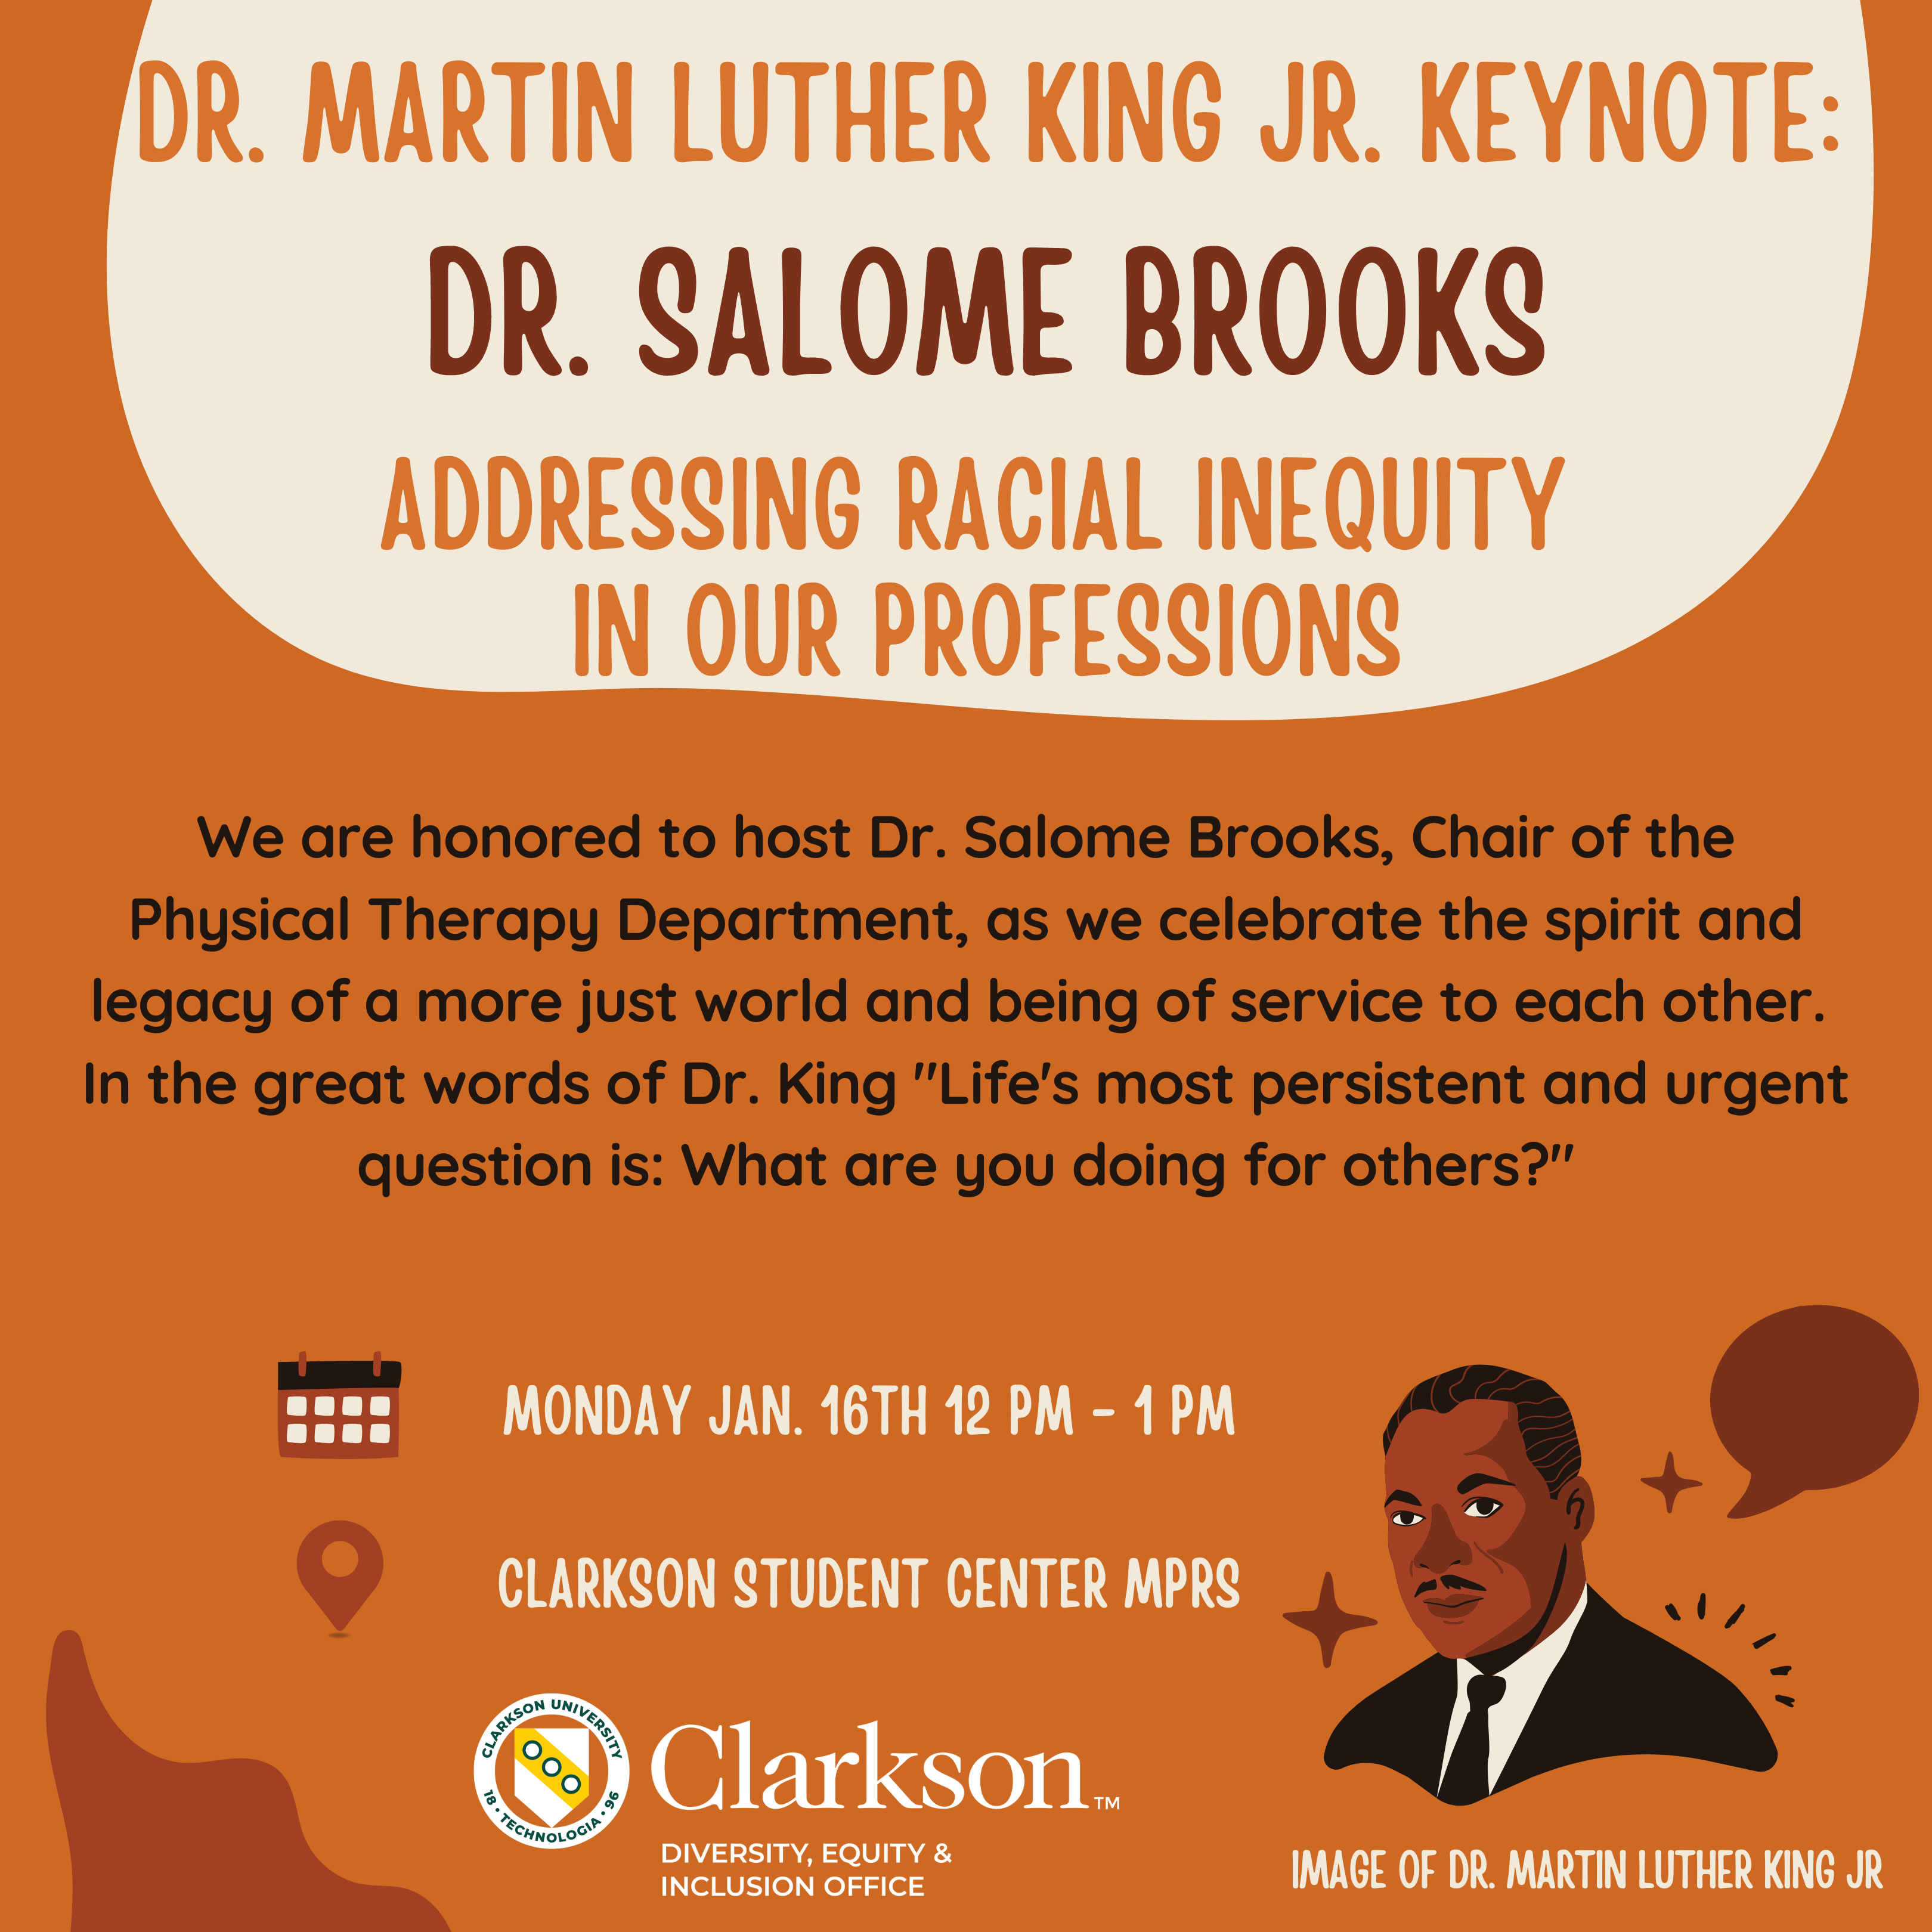 Dr. Martin Luther King JR. Keynote: Dr. Salome Brooks “Addressing Racial Inequity in our Professions”